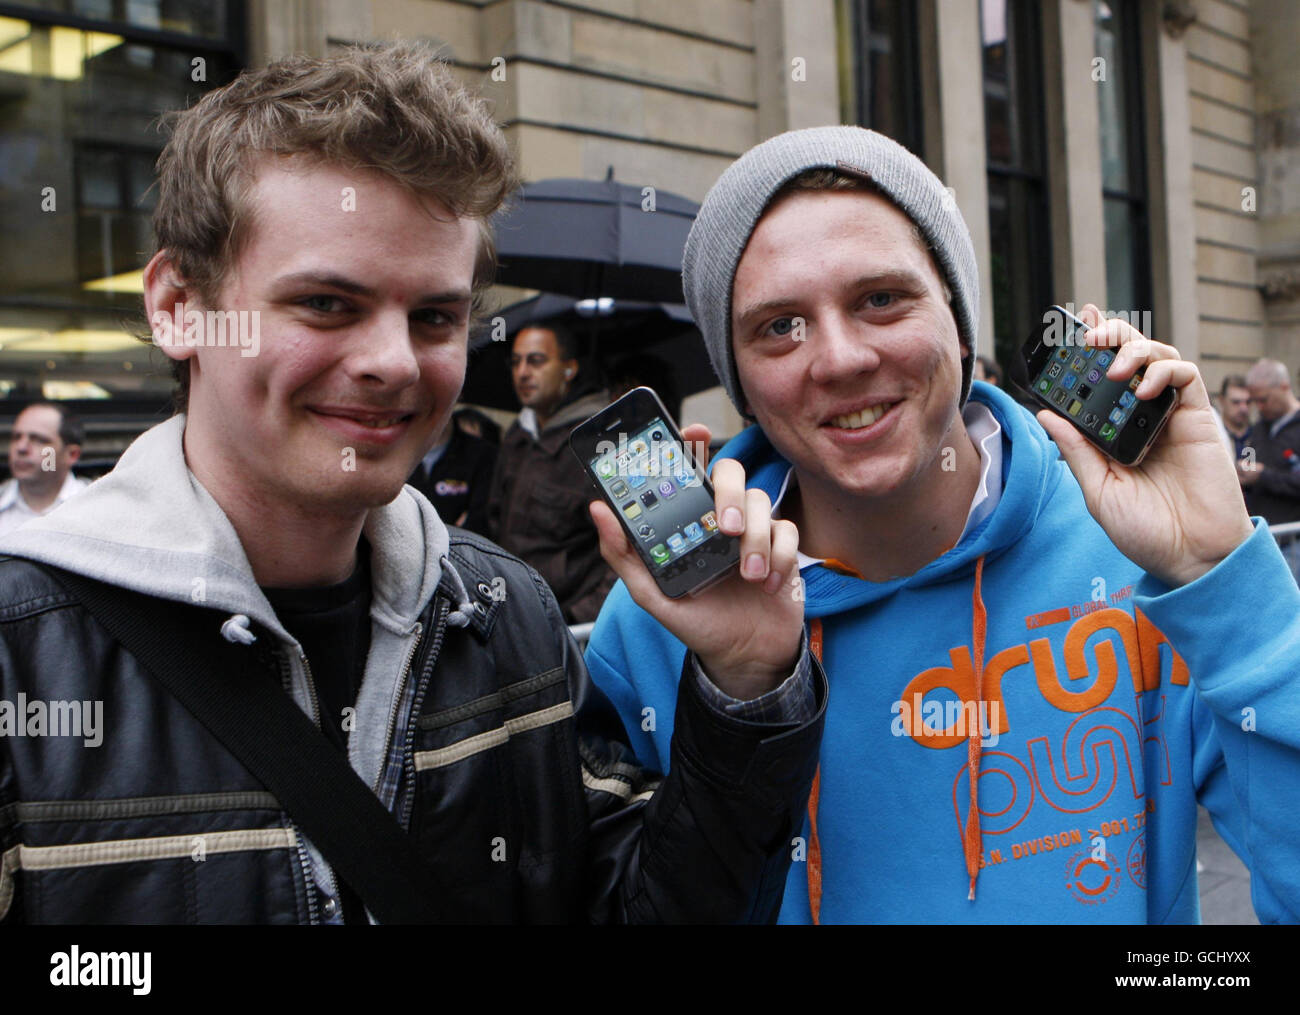 William Shaw (left) and David Polmie with their new iPhones outside the Apple store on Buchanan Street in Glasgow as the iPhone 4 goes on sale across the UK. Stock Photo